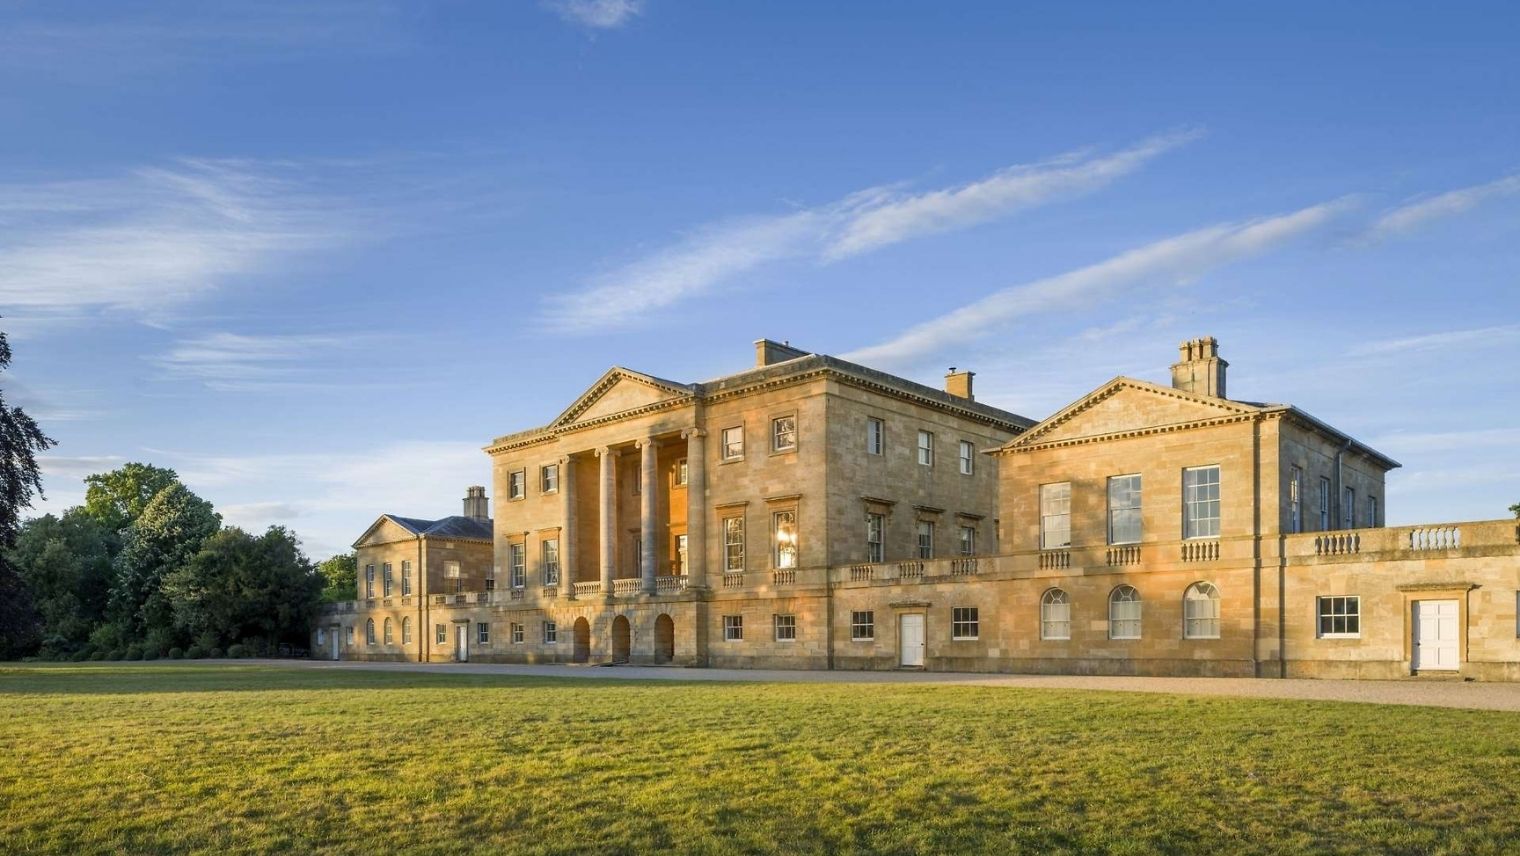 The country house at Basildon Park